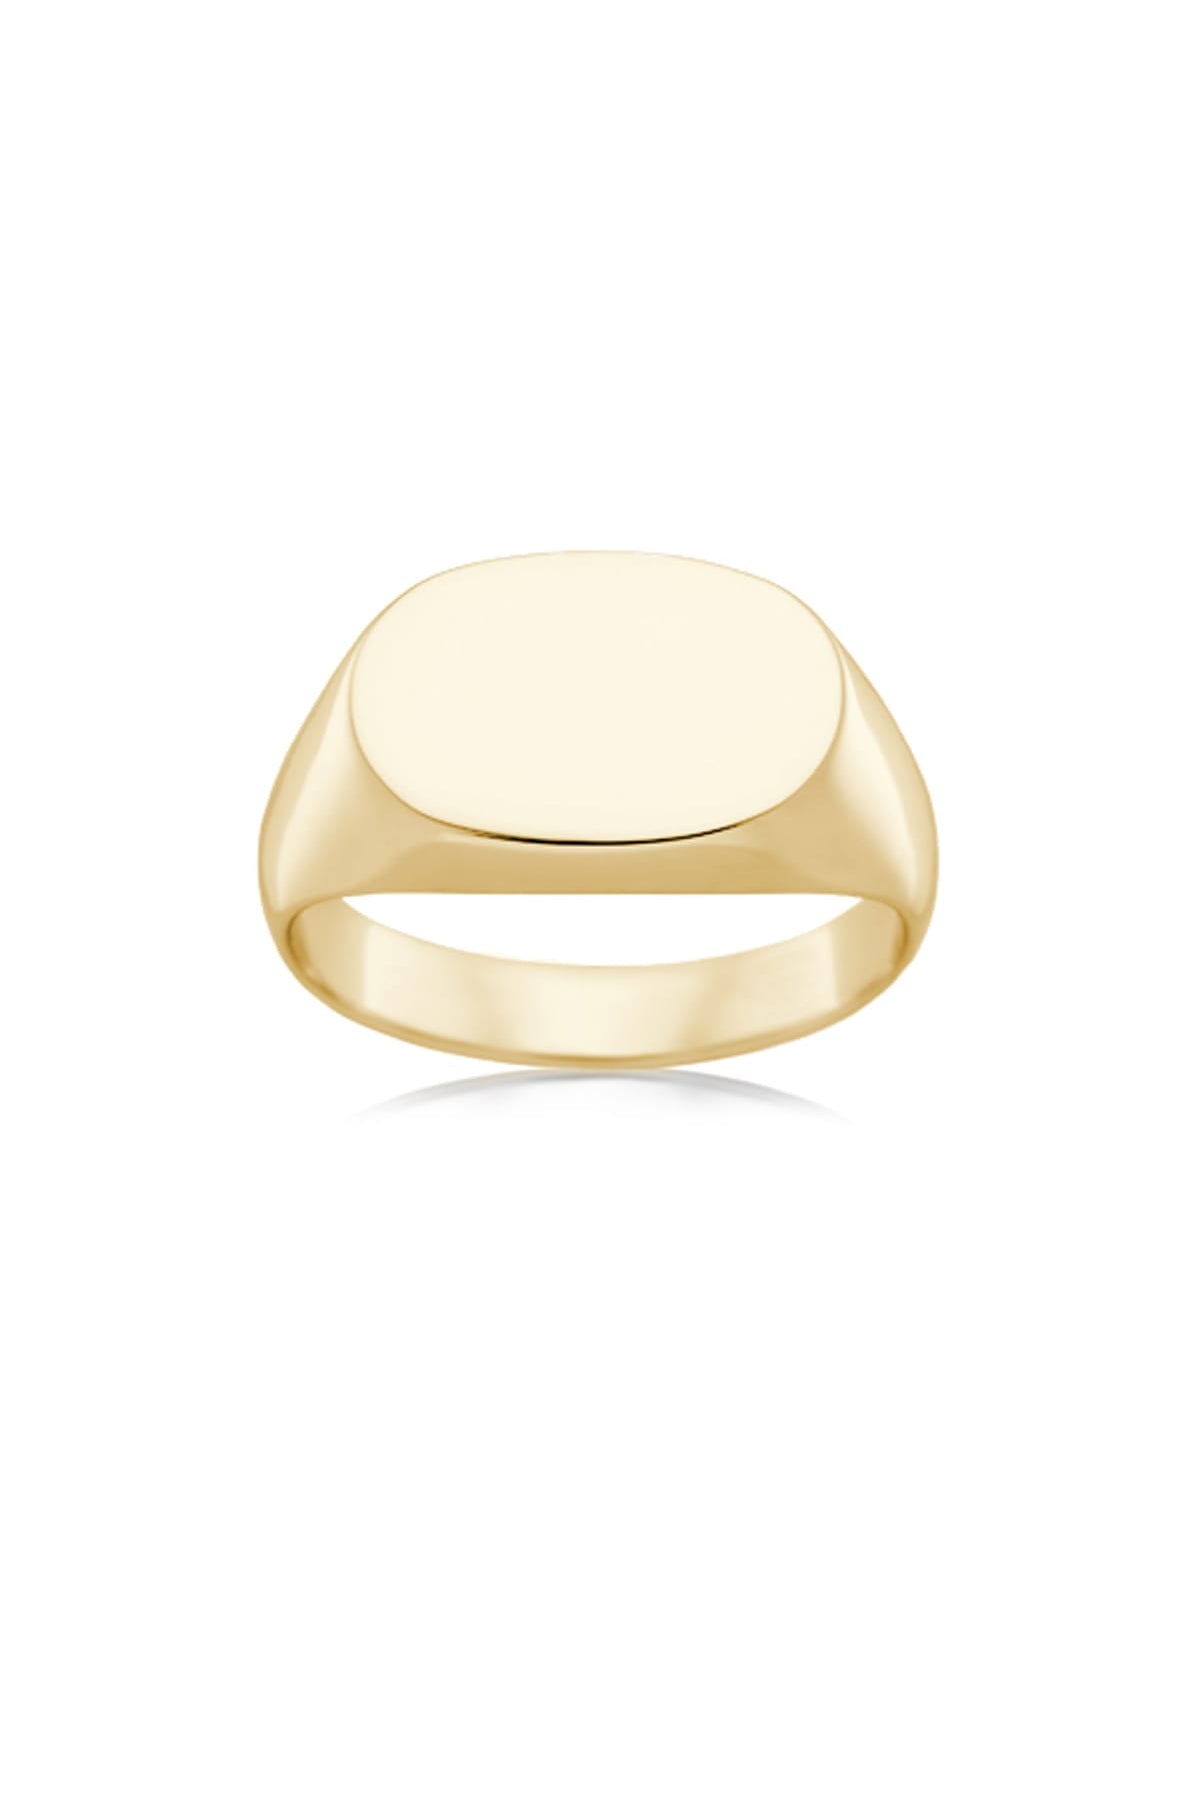 Solid Sideways Oval Flat Top Plain Signet Ring available at LeGassick Diamonds and Jewellery Gold Coast, Australia.